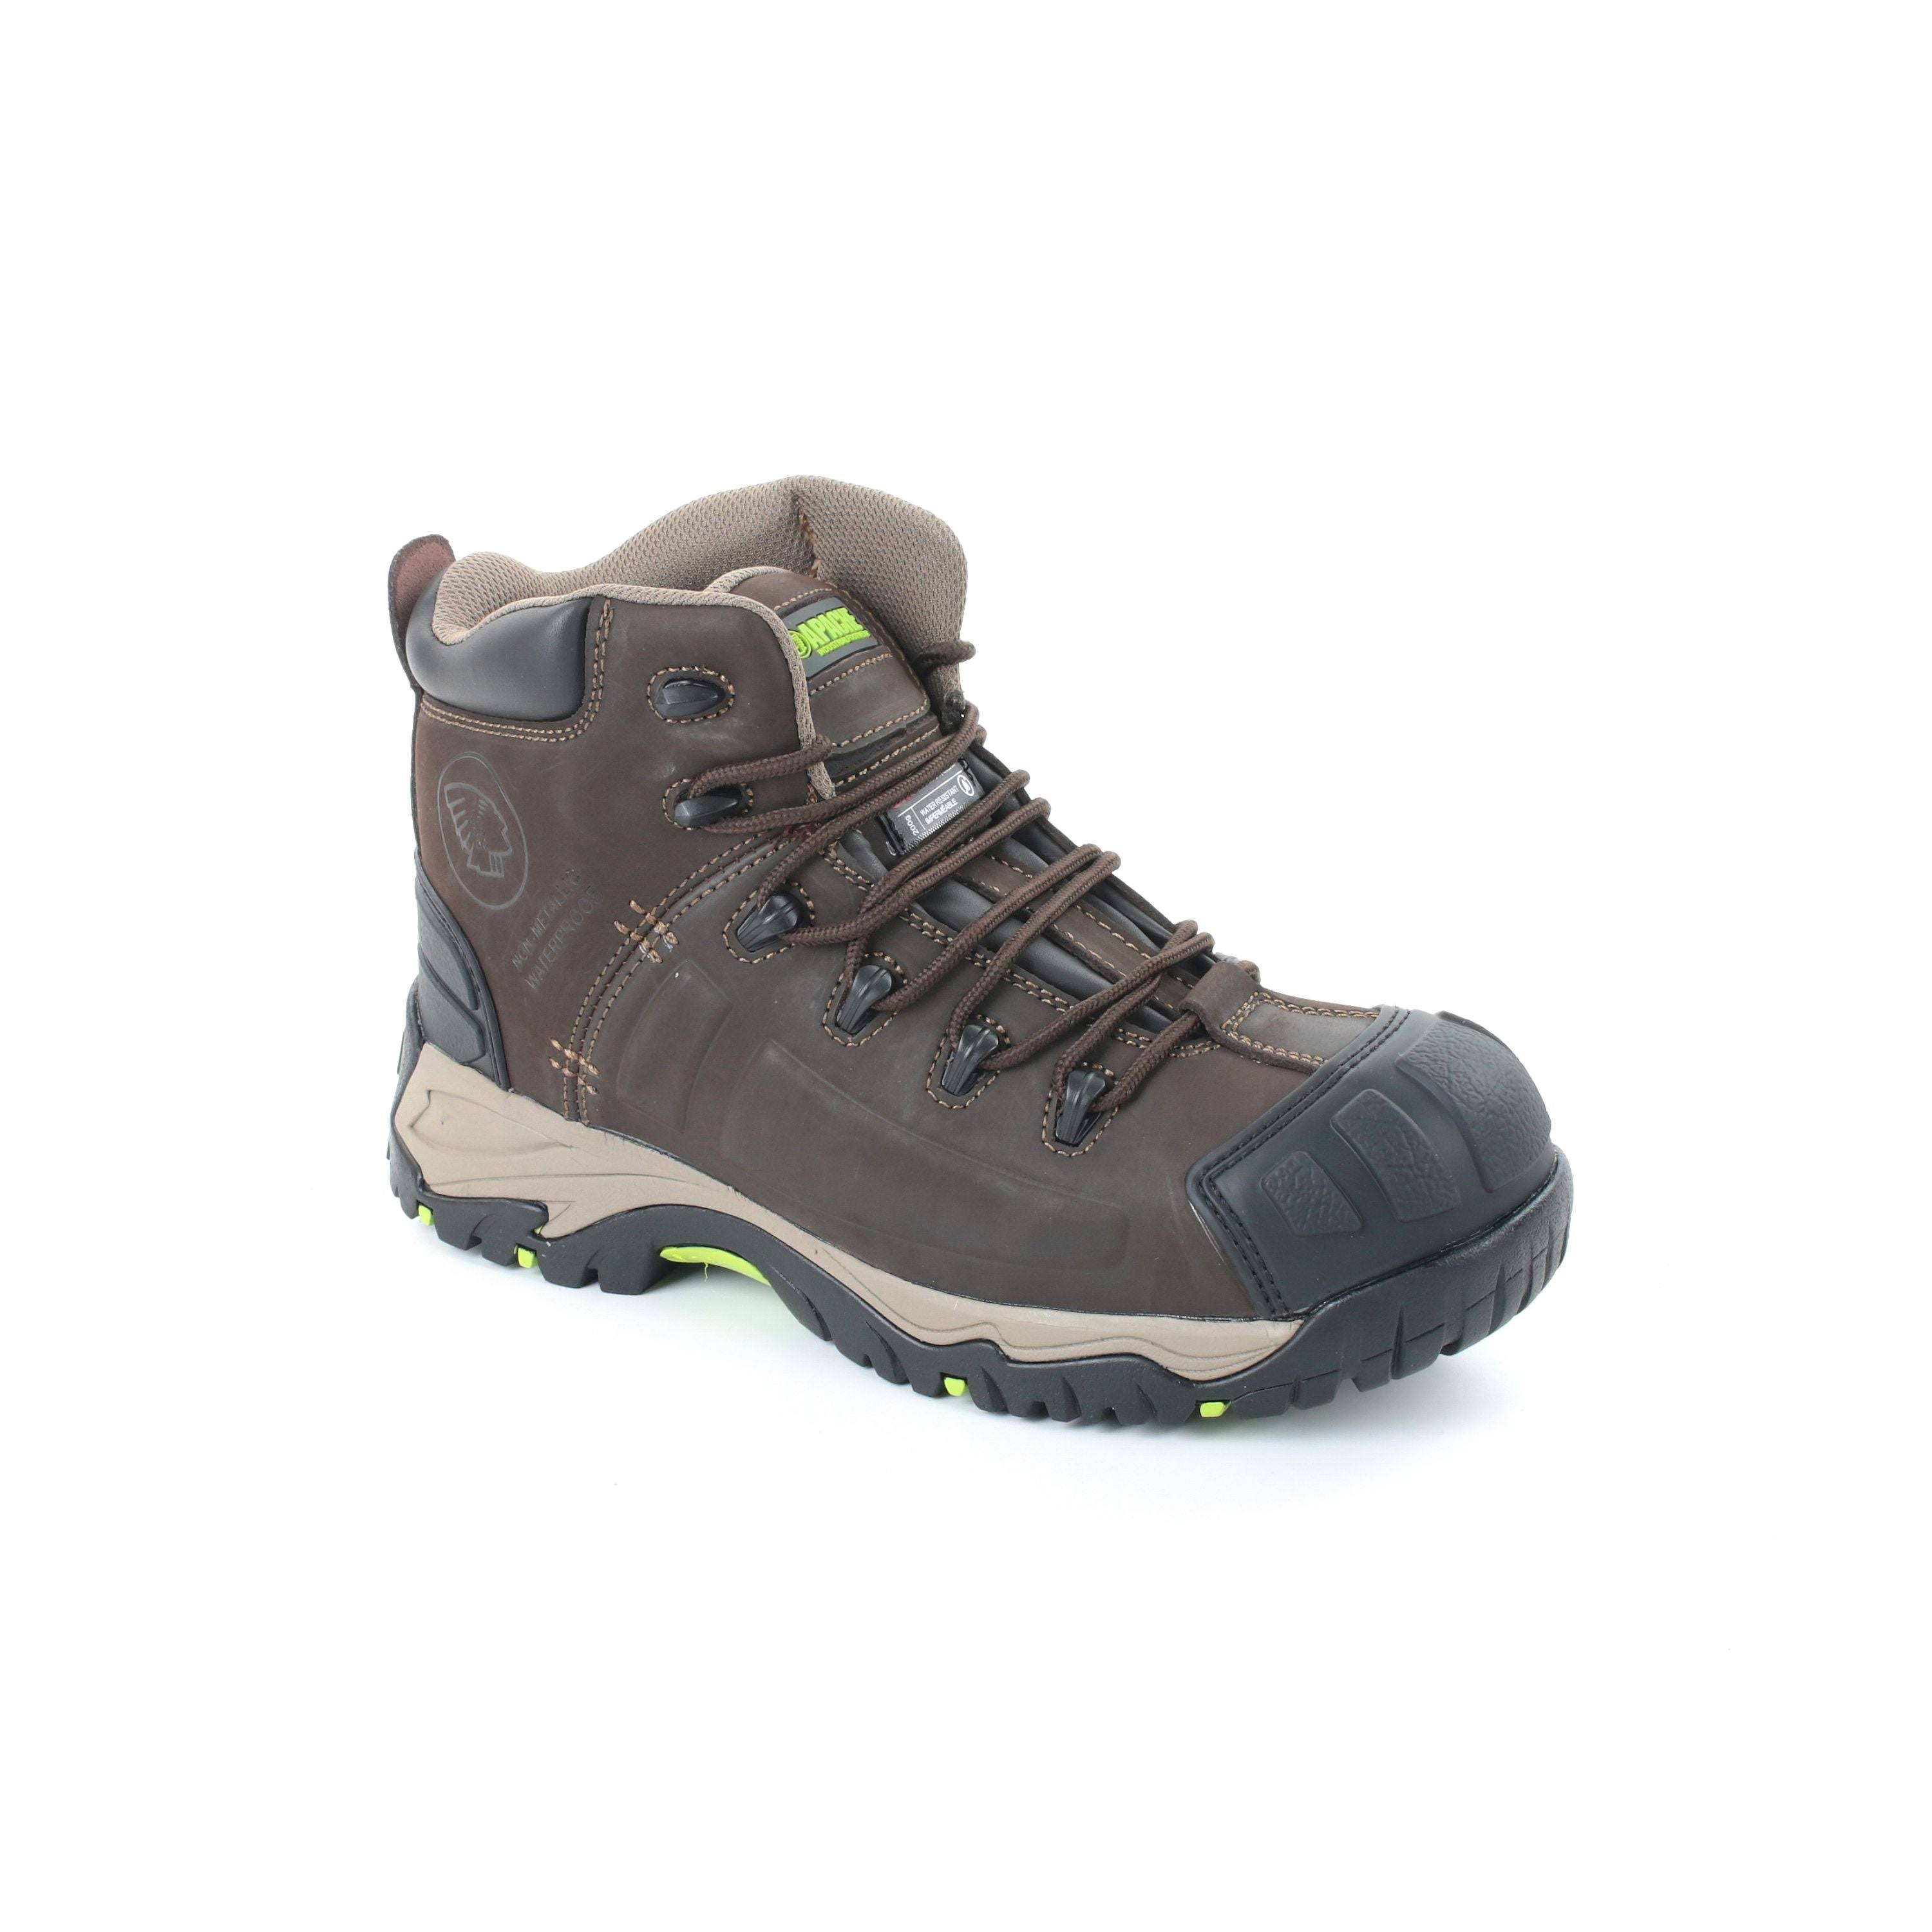 Apache Neptune Non Metallic Waterproof Safety Boots - Brown Size: 12